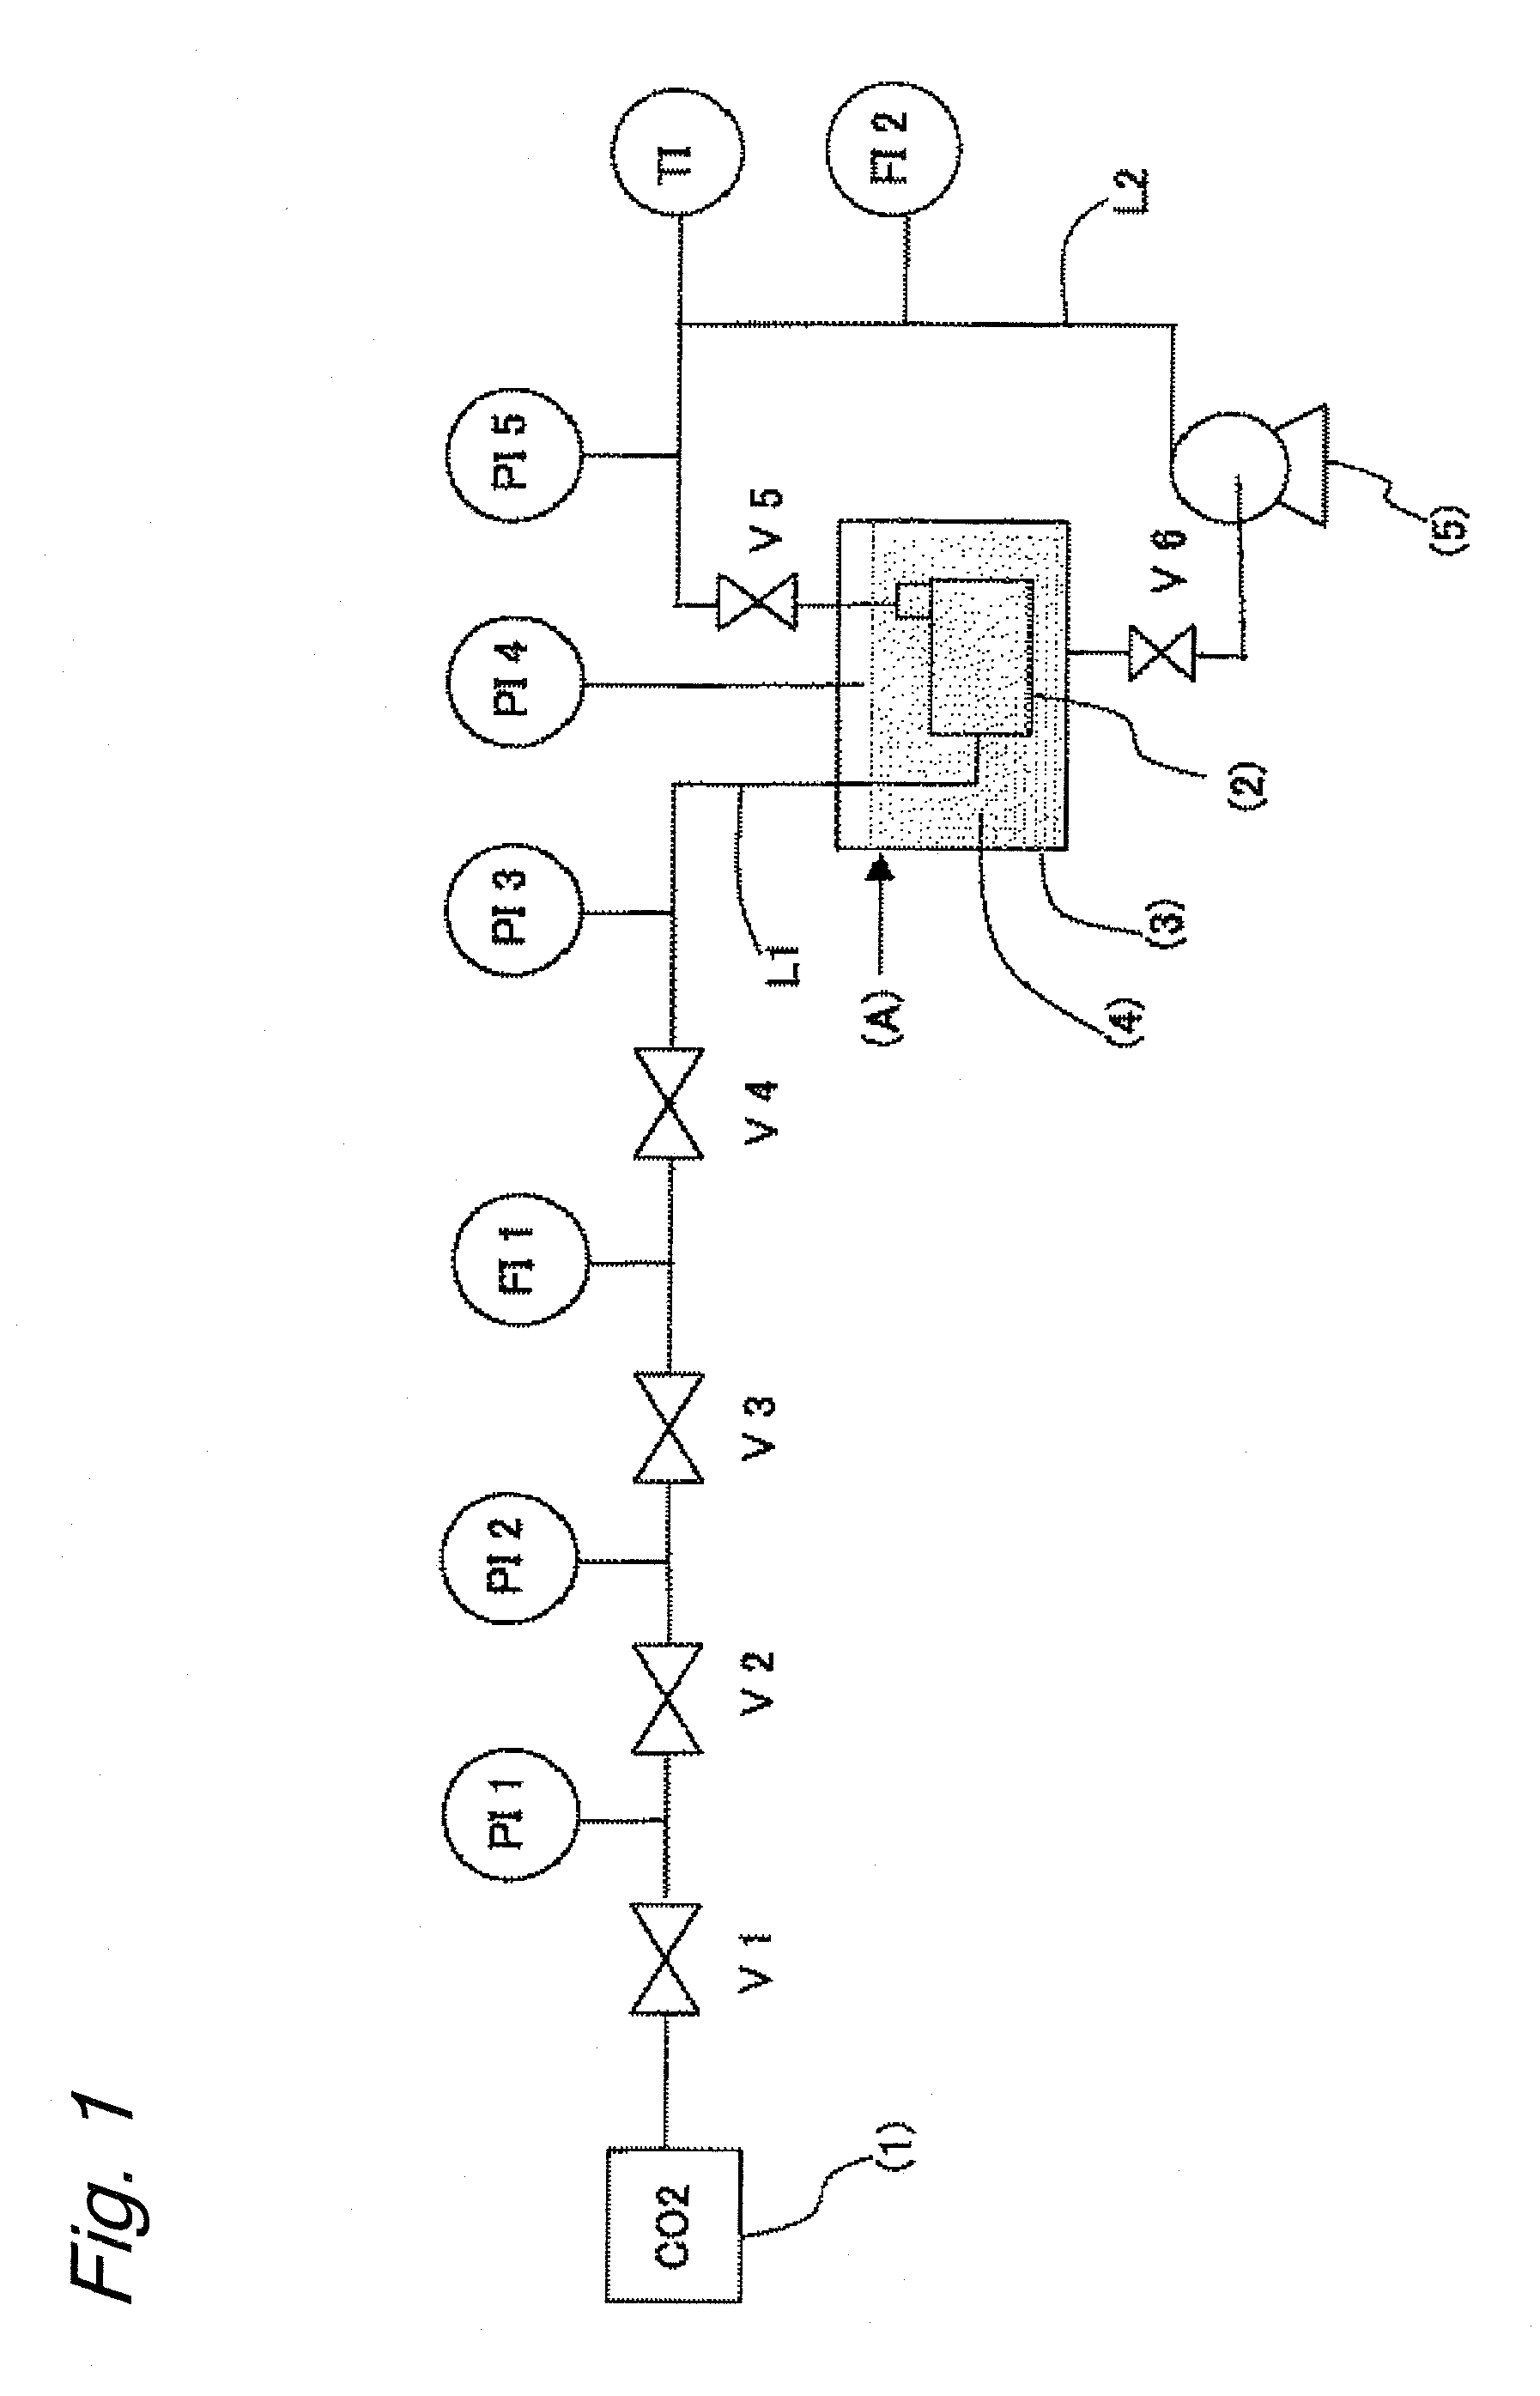 Method for producing carbonated beverages